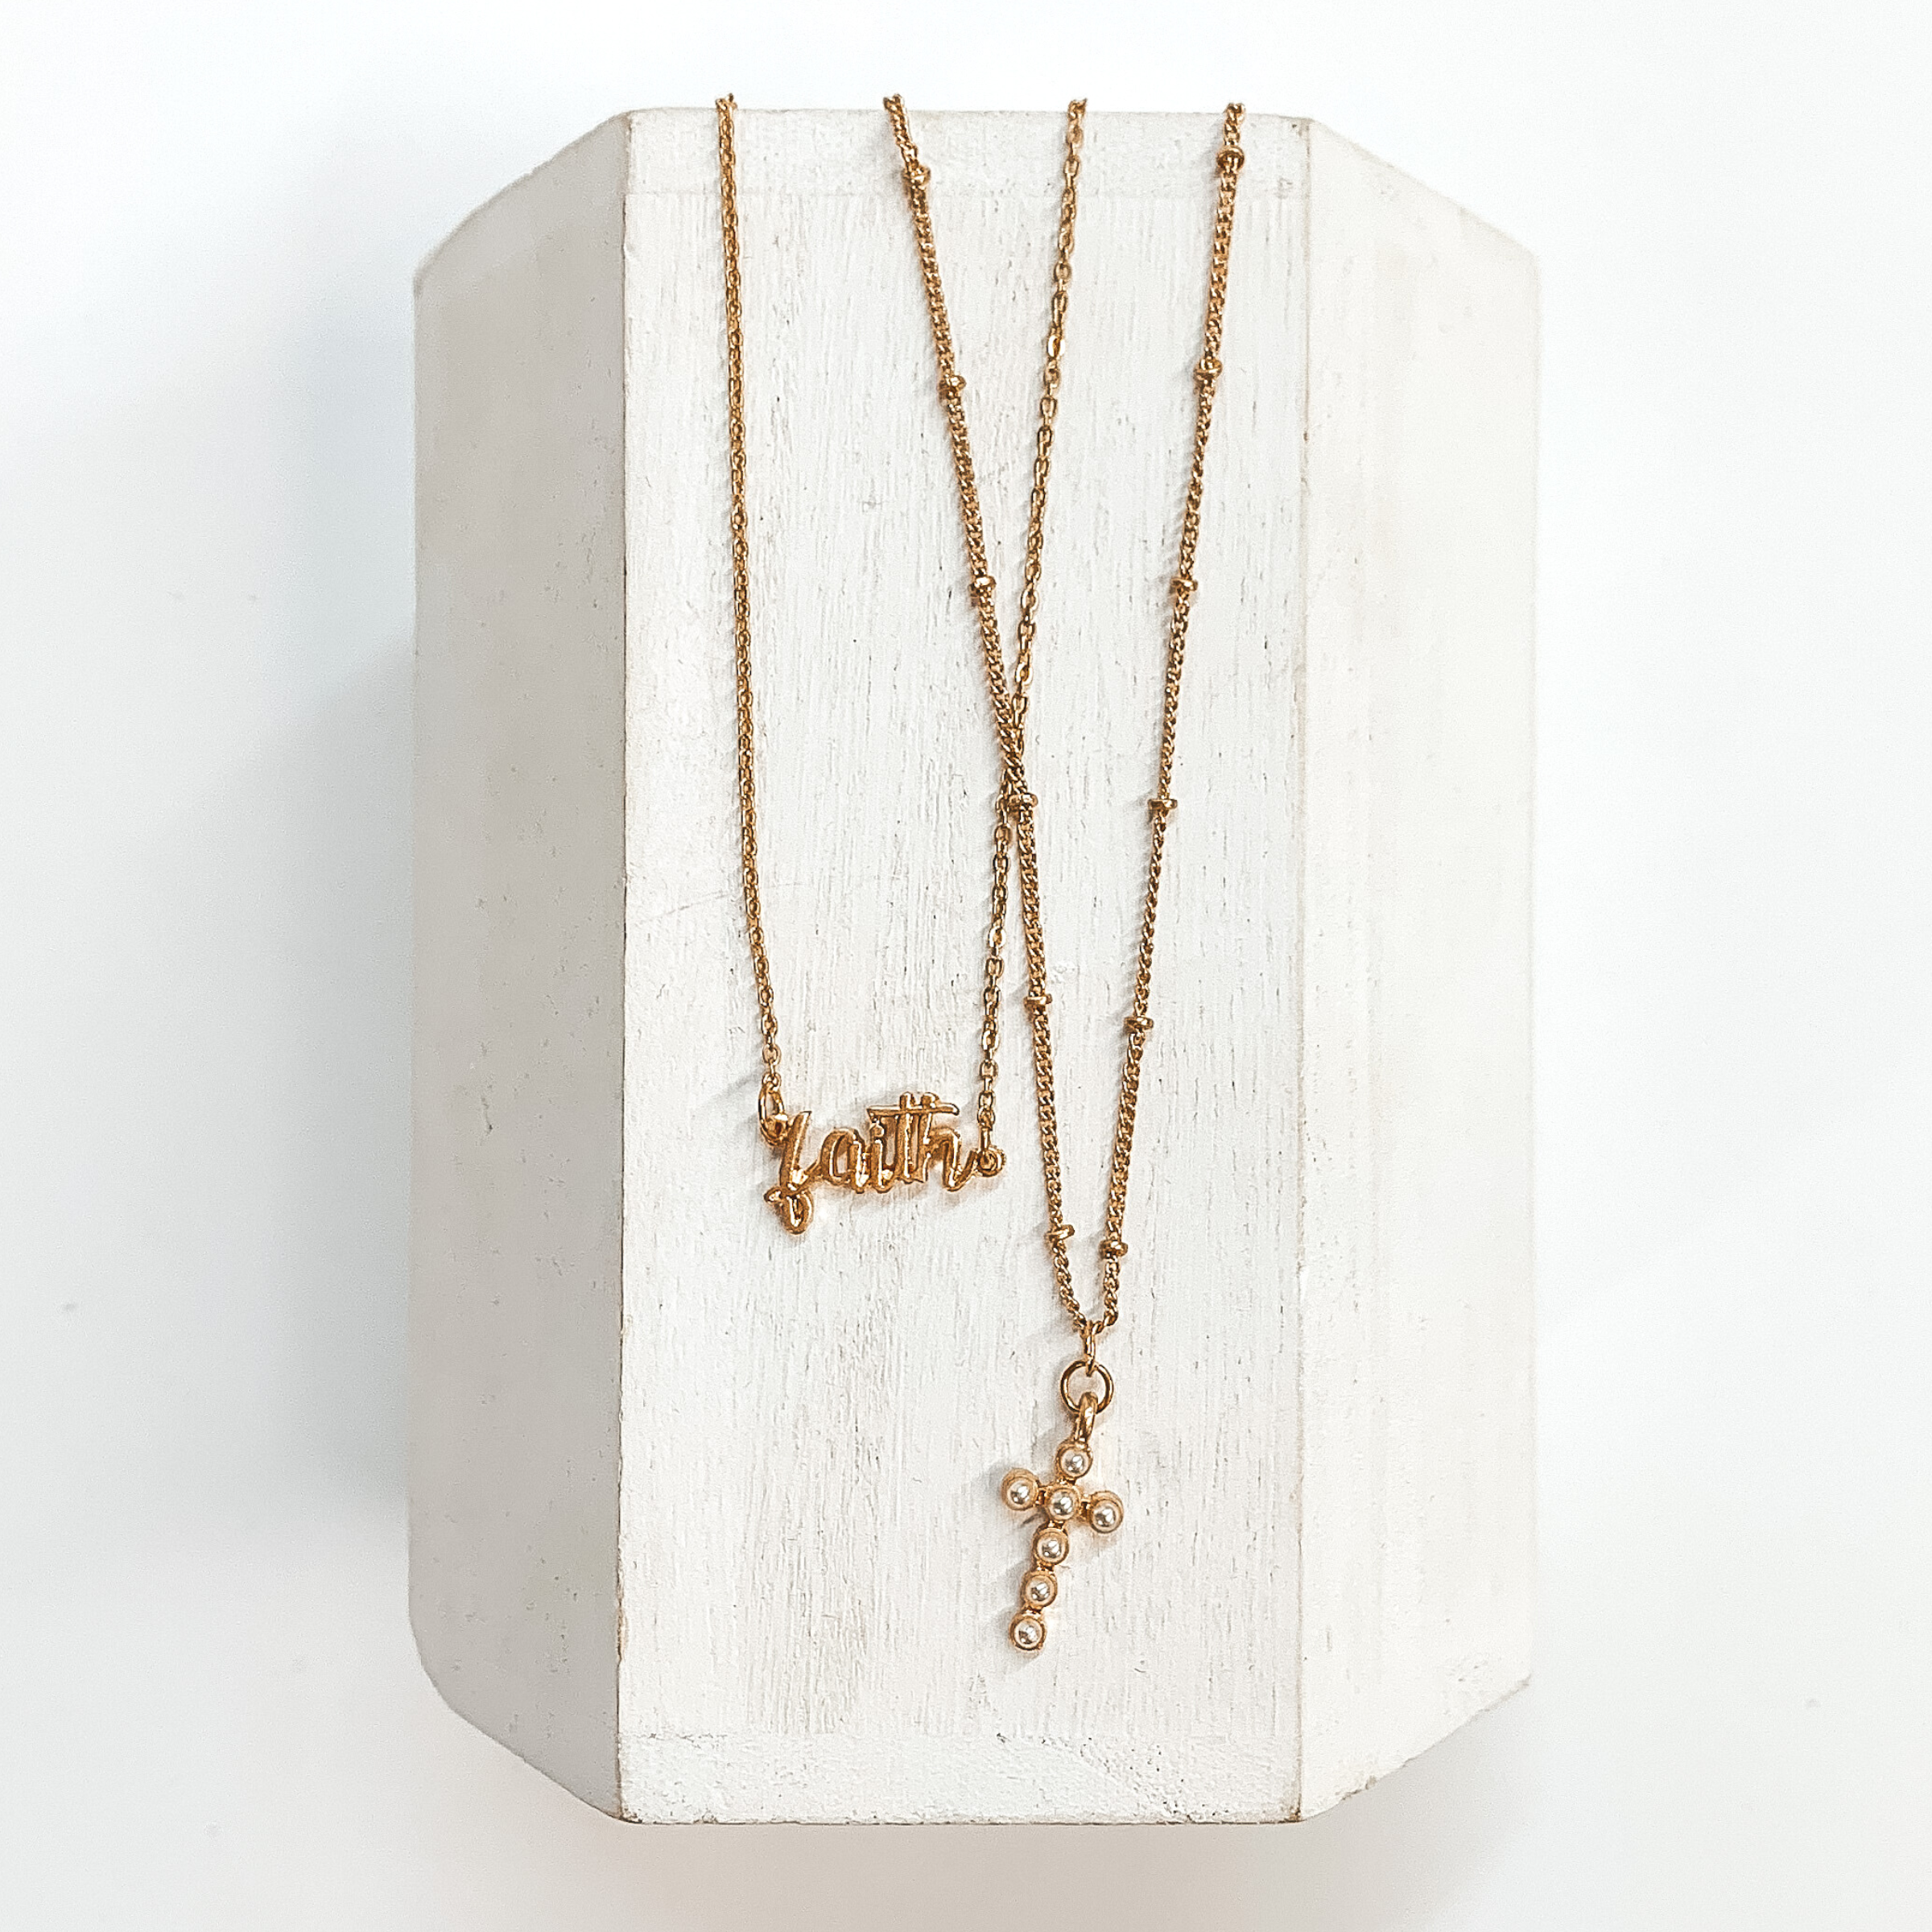 Double layered gold necklace with a 'faith' pendant and cross pendant.  The longer necklace has gold spacers has a gold cross with pearls. The  shorter strand has 'faith' in the center. These necklaces are taken on a  white block and on a white background.